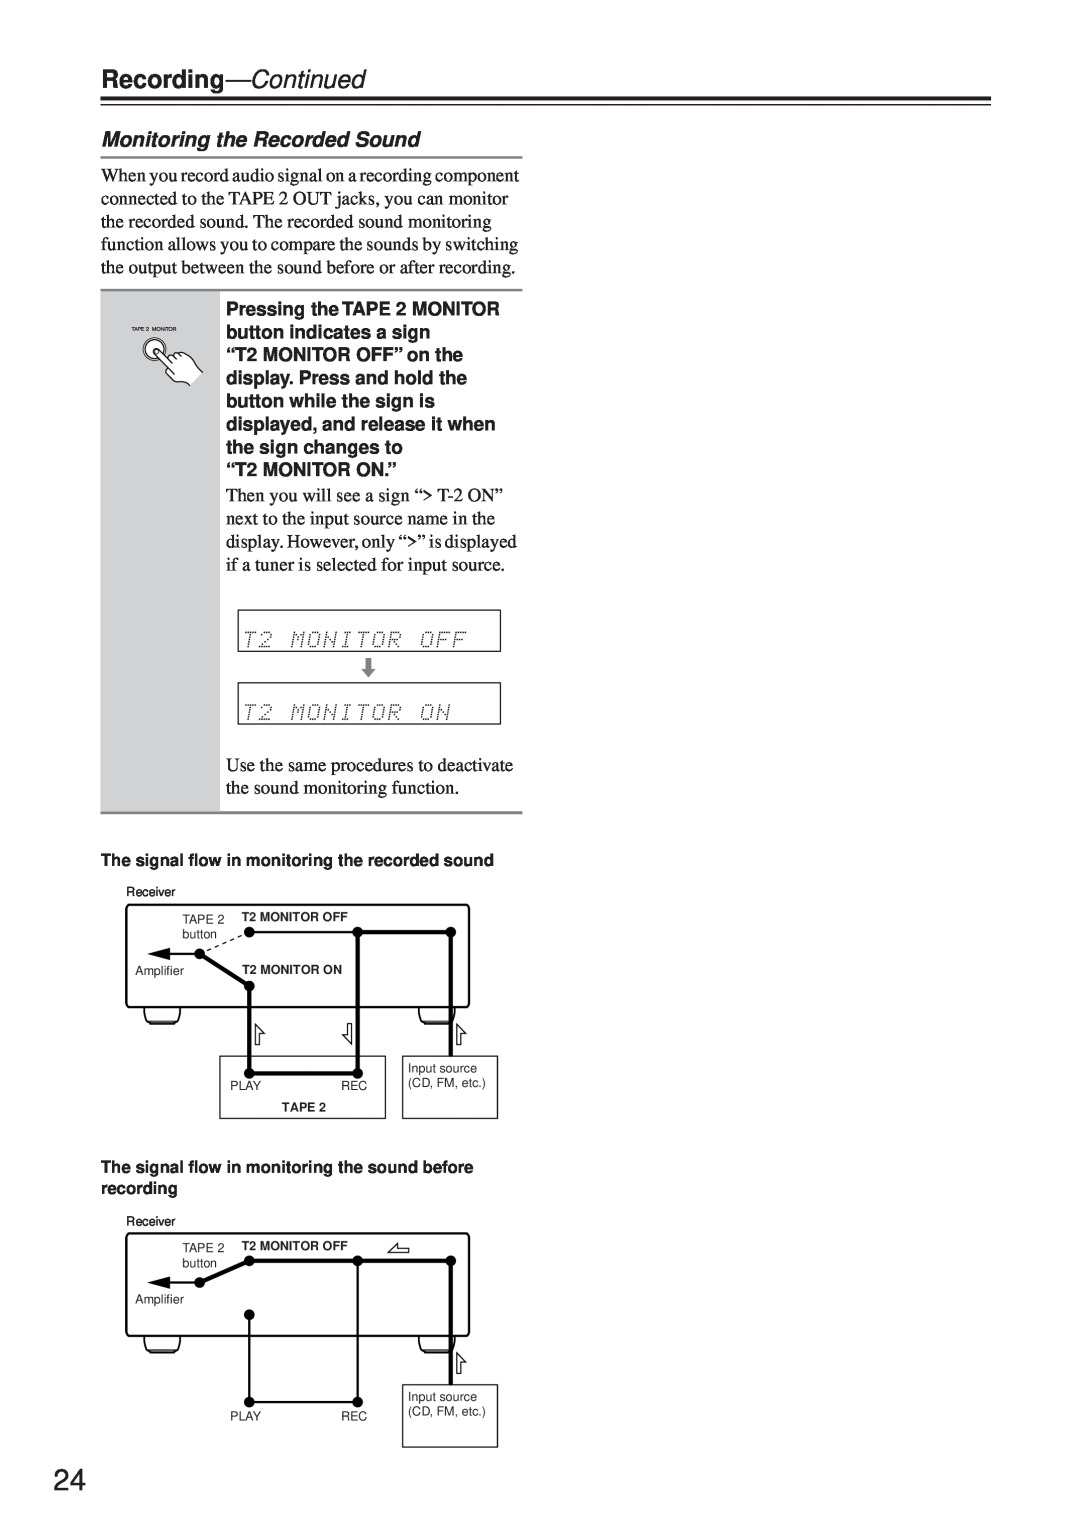 Onkyo TX-8255 instruction manual Monitoring the Recorded Sound, Recording-Continued 